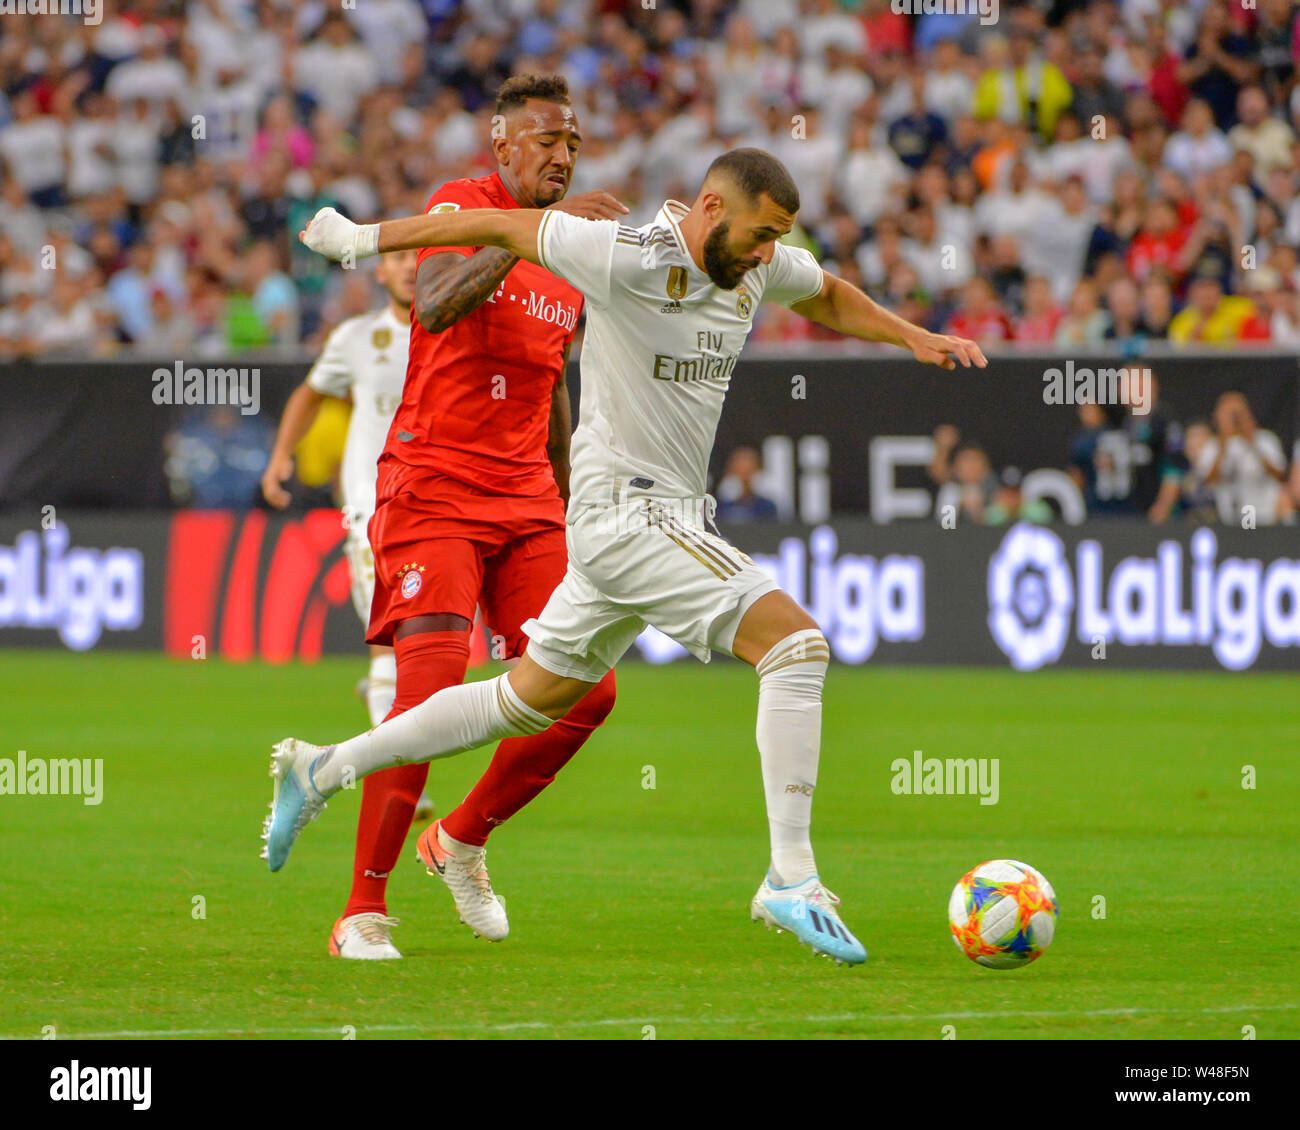 Houston, TX, USA. 20th July, 2019. Real Madrid forward, Karim Benzema (9), moves the ball downfield as Bayern defender, Jerome Boateng (17), tries to steal it away, during the 2019 International Champions Cup match between Real Madrid and FC Bayern, at NRG Stadium in Houston, TX. FC Bayern defeated Real Madrid, 3-1. Mandatory Credit: Kevin Langley/Sports South Media/CSM/Alamy Live News Stock Photo